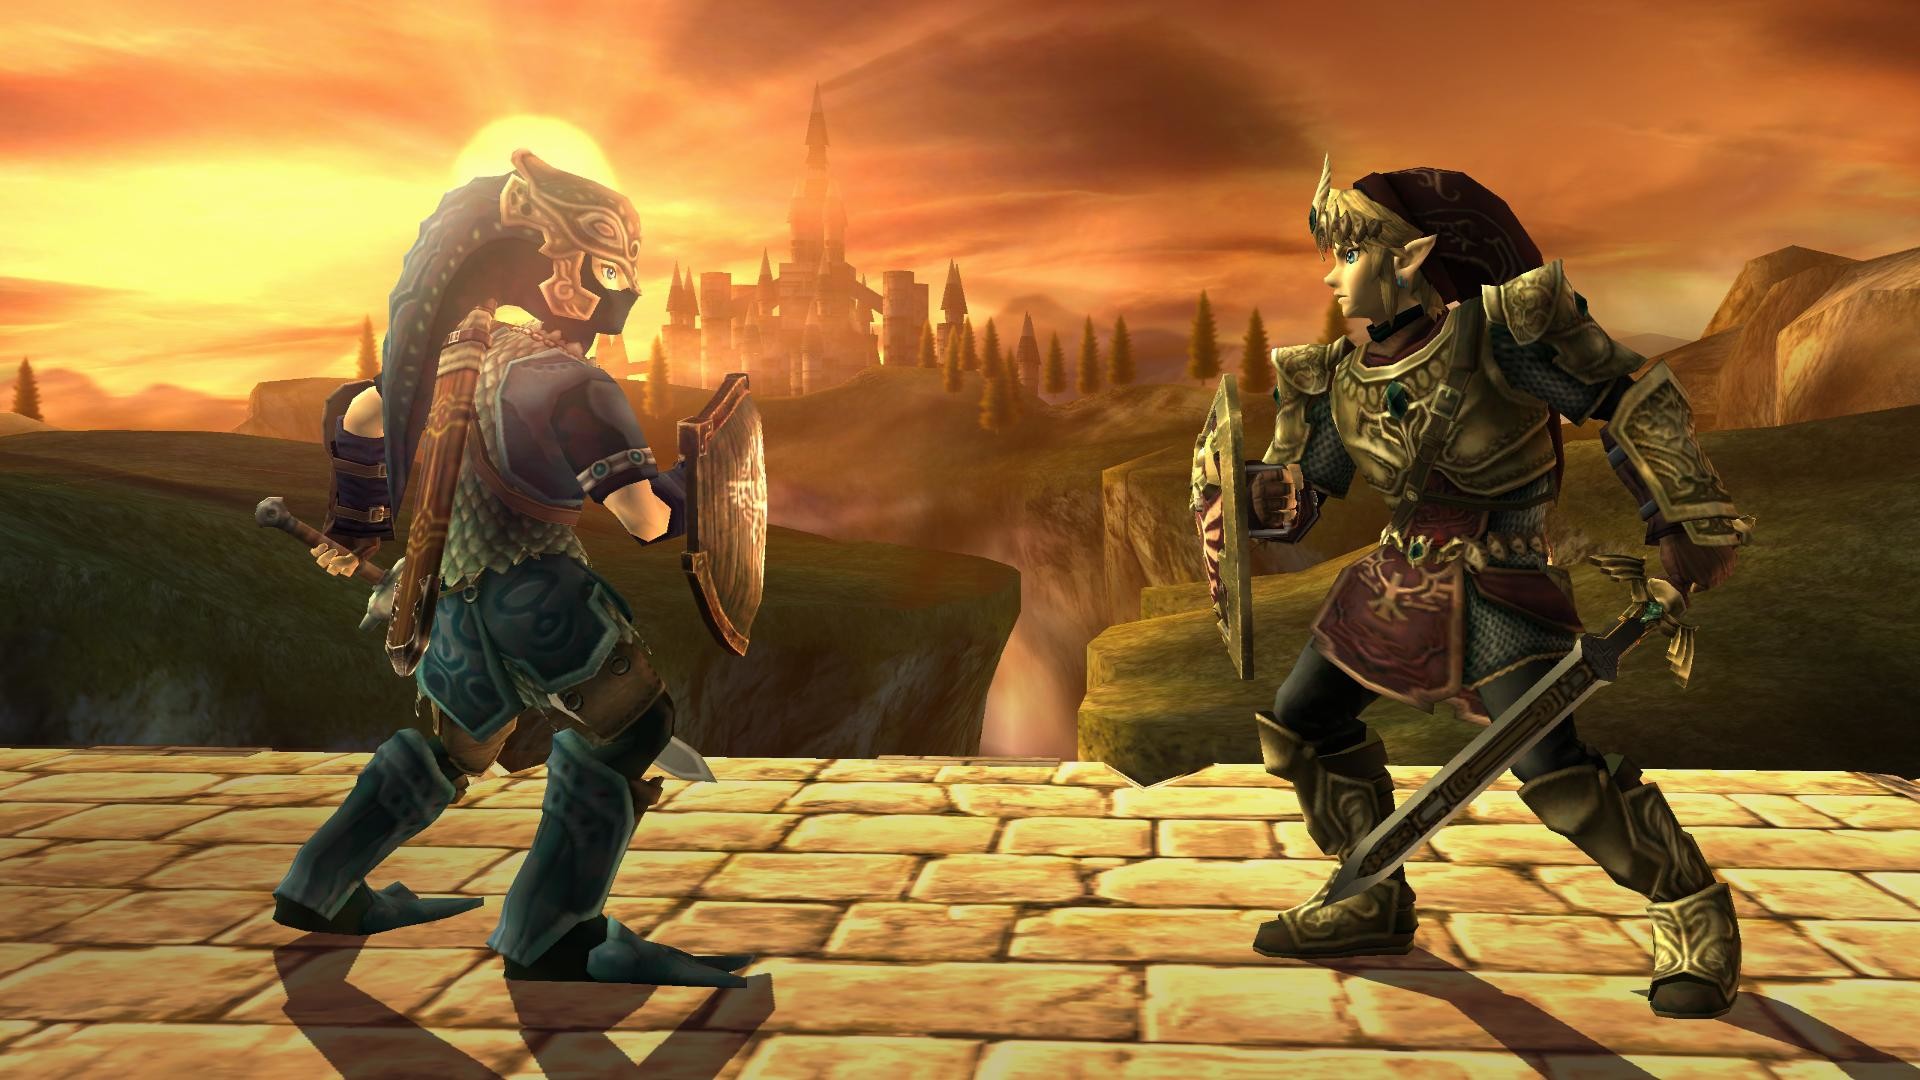 Download Twilight Princess wallpapers for mobile phone free Twilight  Princess HD pictures